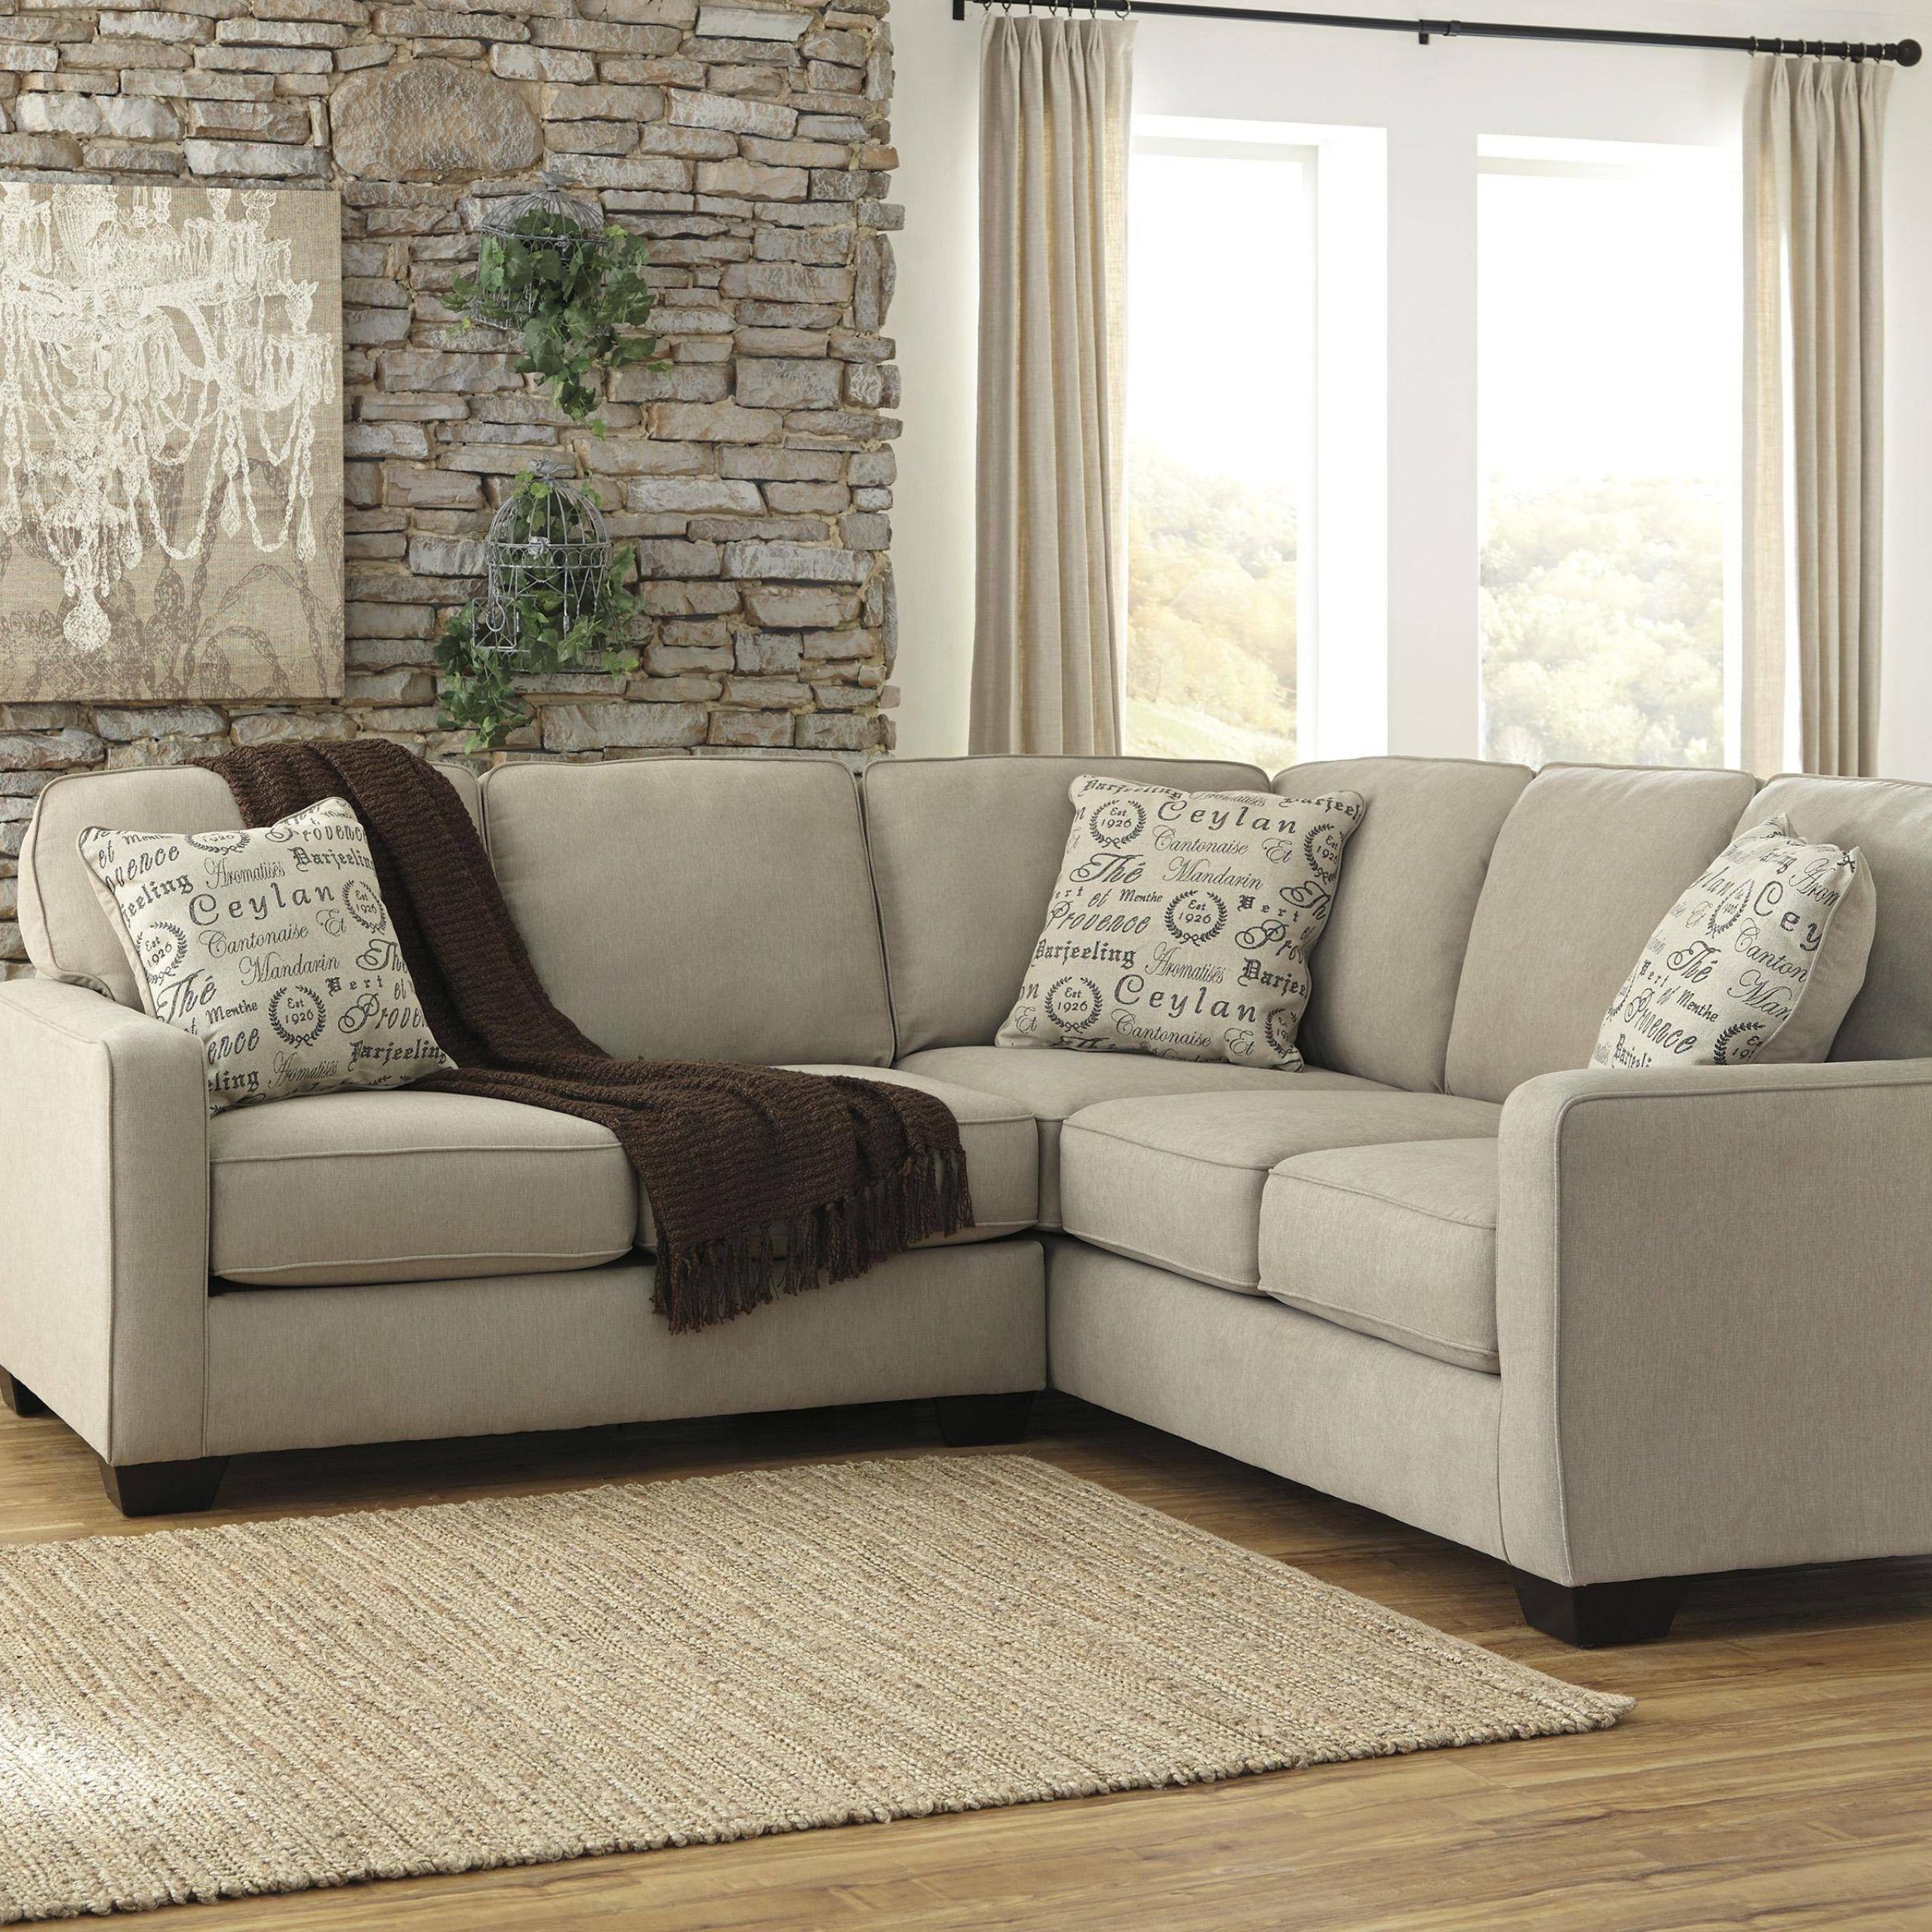 Buy Ashley Alenya Sectional Sofa Left Hand Chase In Quartz, Linen Online With Regard To Small L Shaped Sectional Sofas In Beige (View 18 of 21)